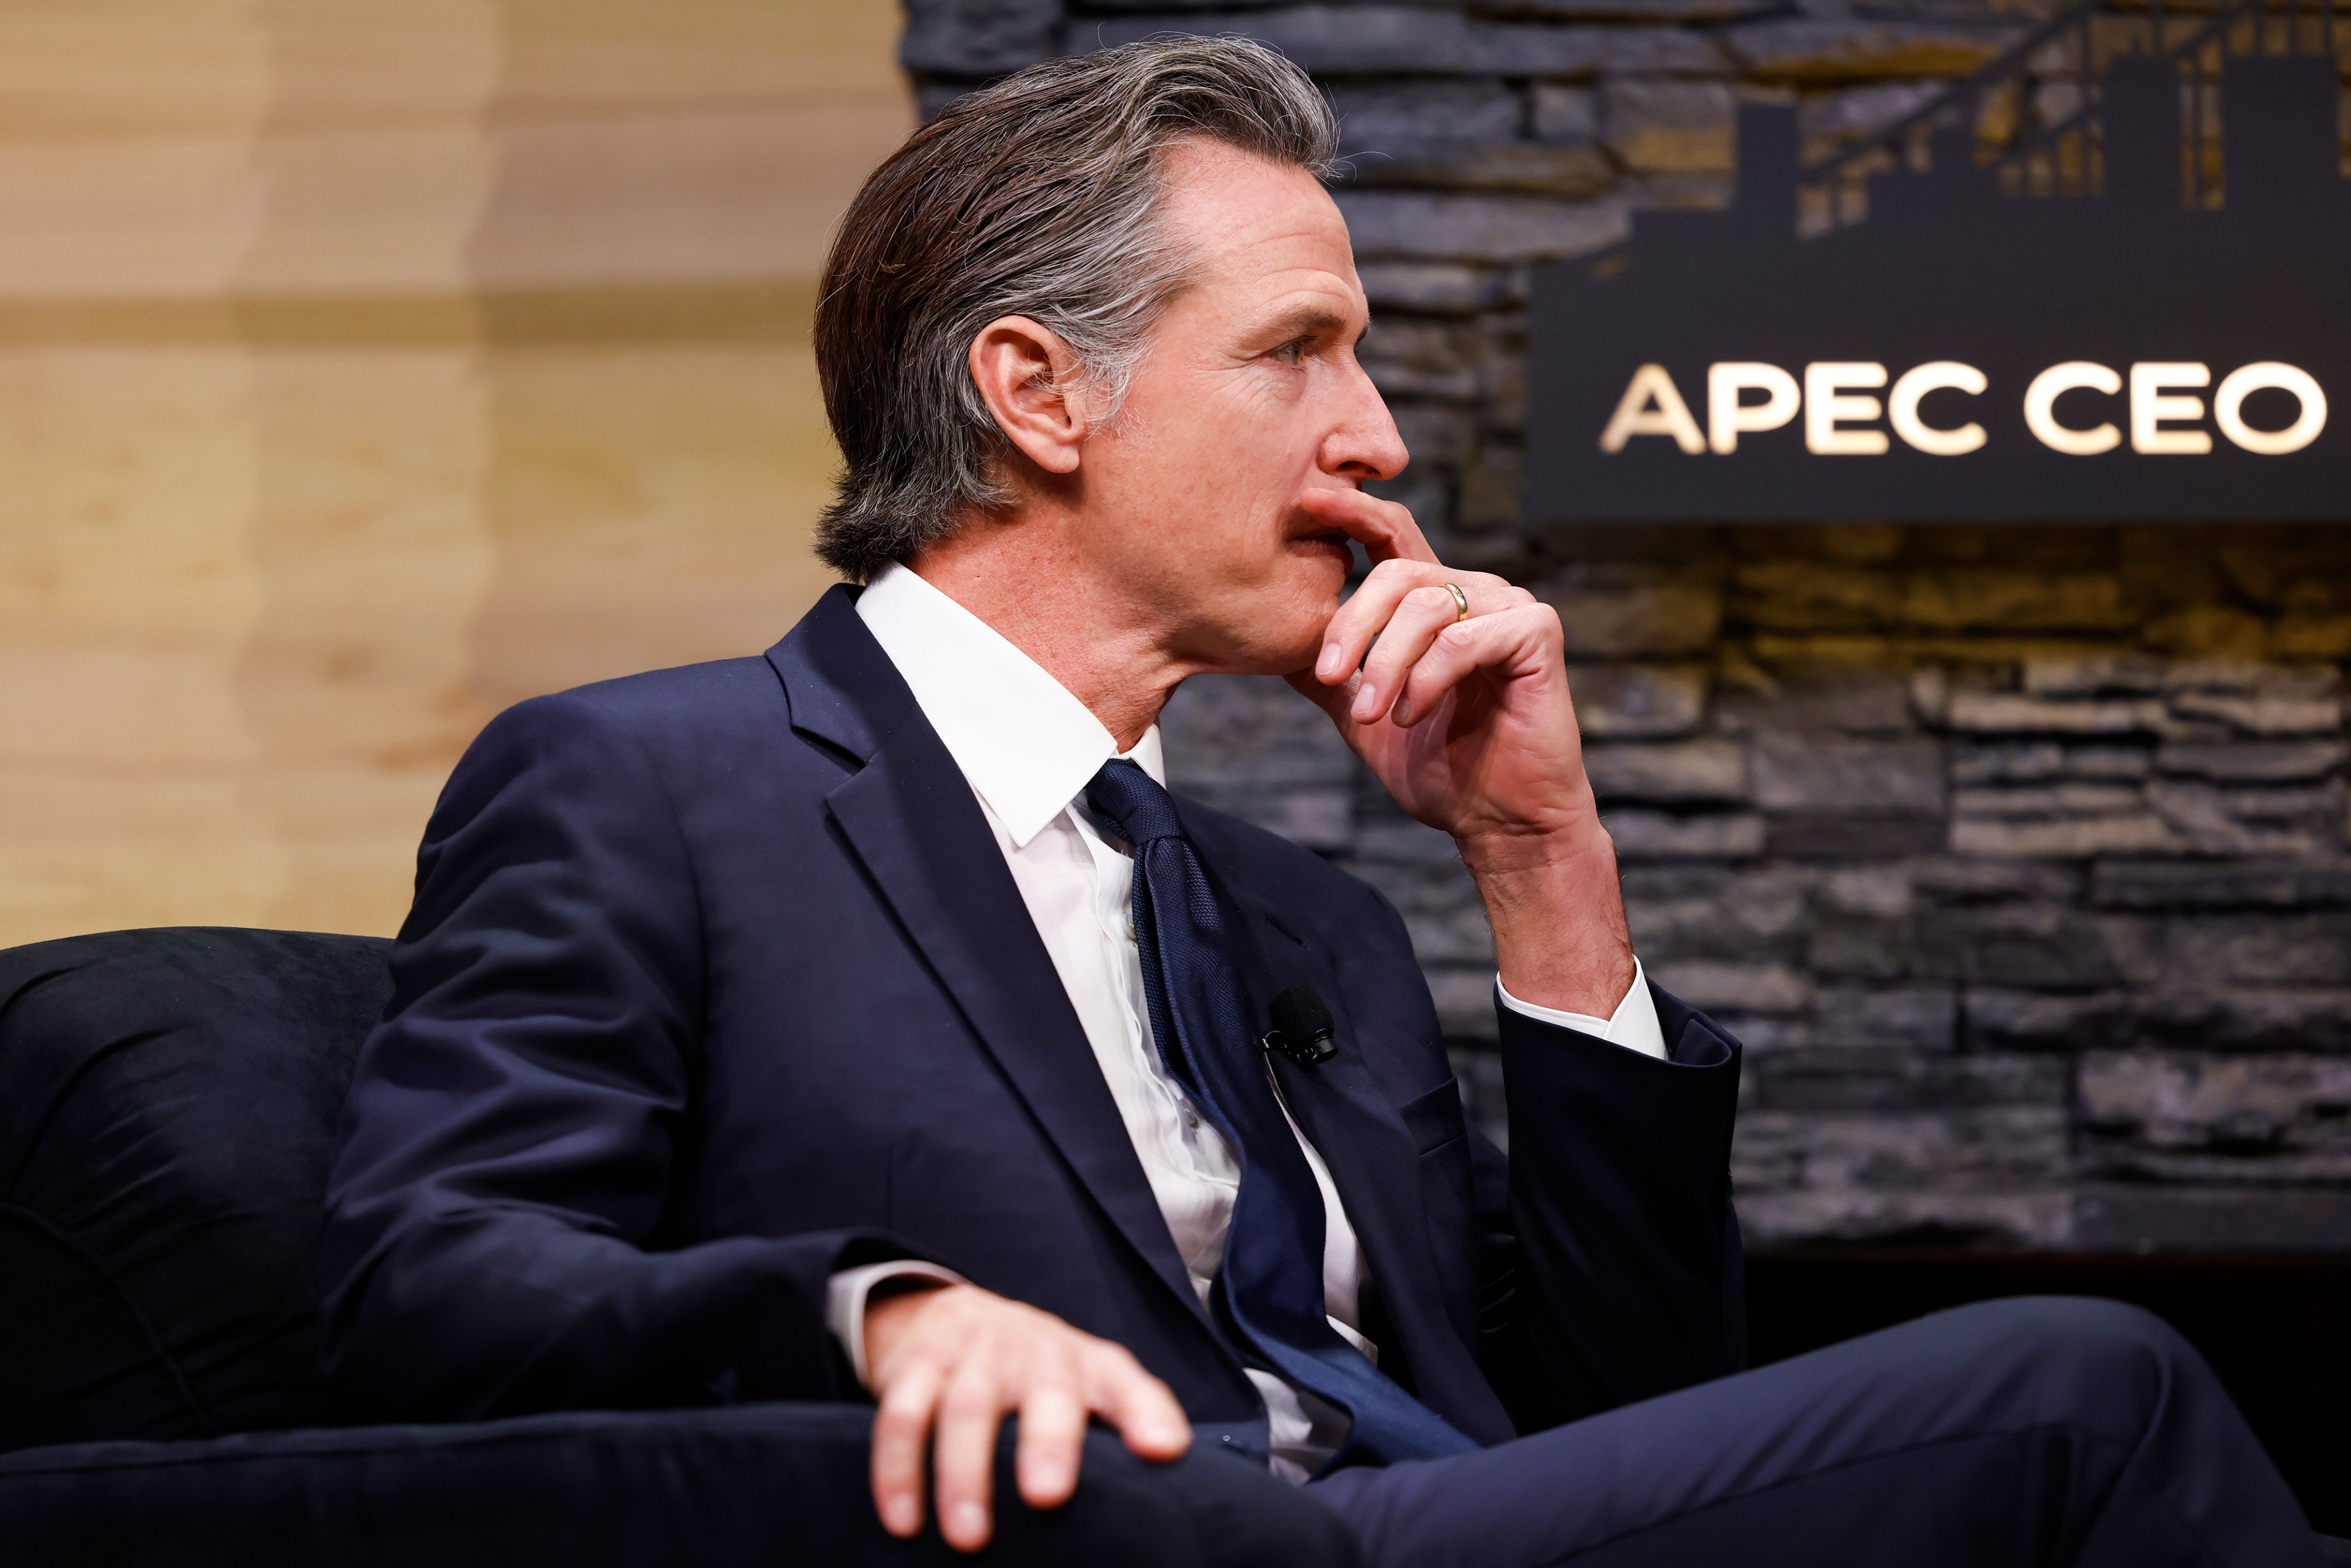 A man, Governor Gavin Newsom, sits in a chair, looking to the right with his hand on his chin as if in thought.